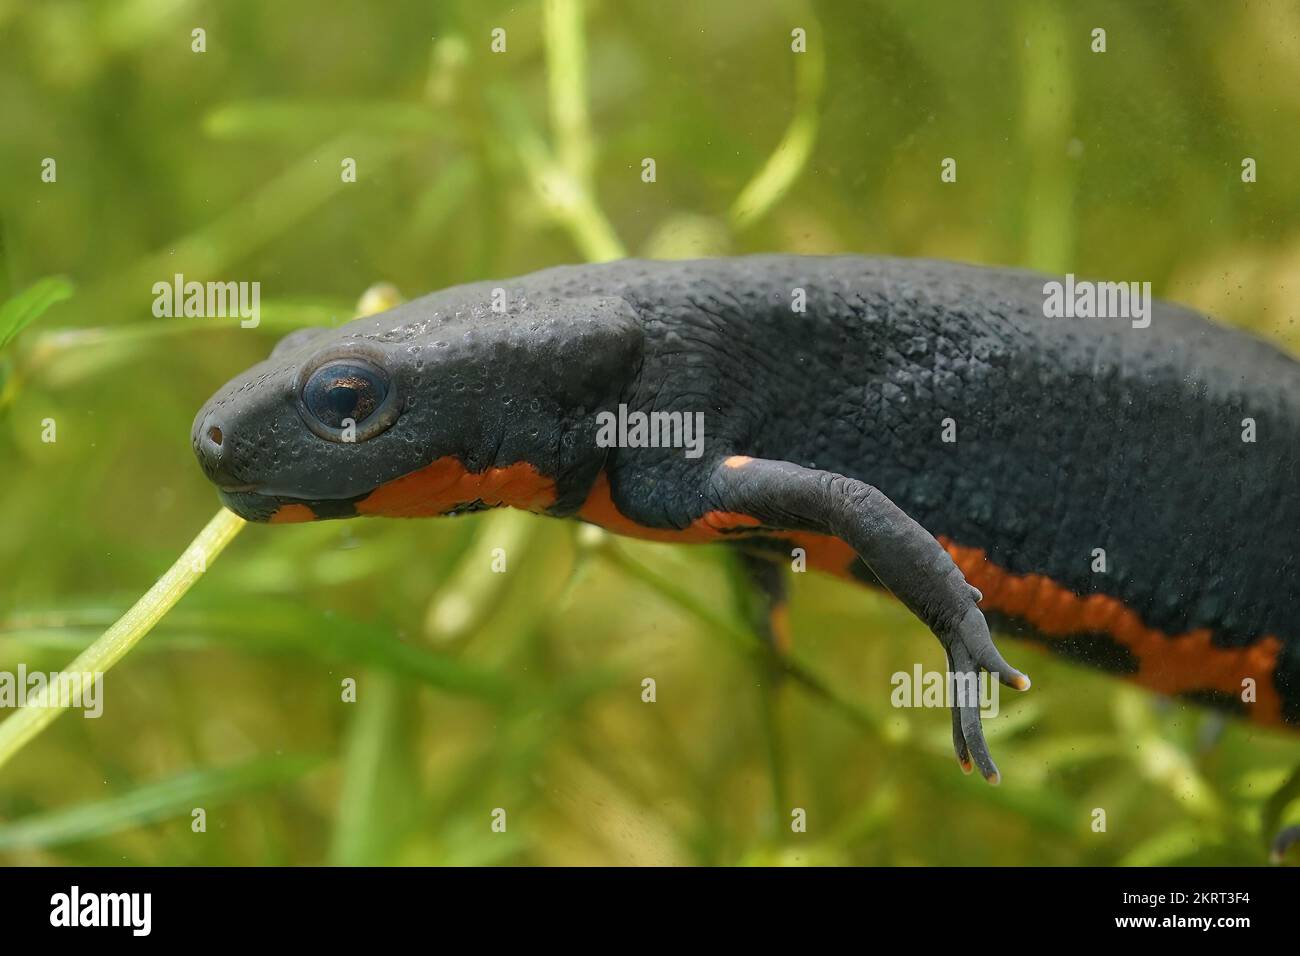 Detailed closeup on an aquatic small Chinese firebellied newt, Cynops orientalis Stock Photo